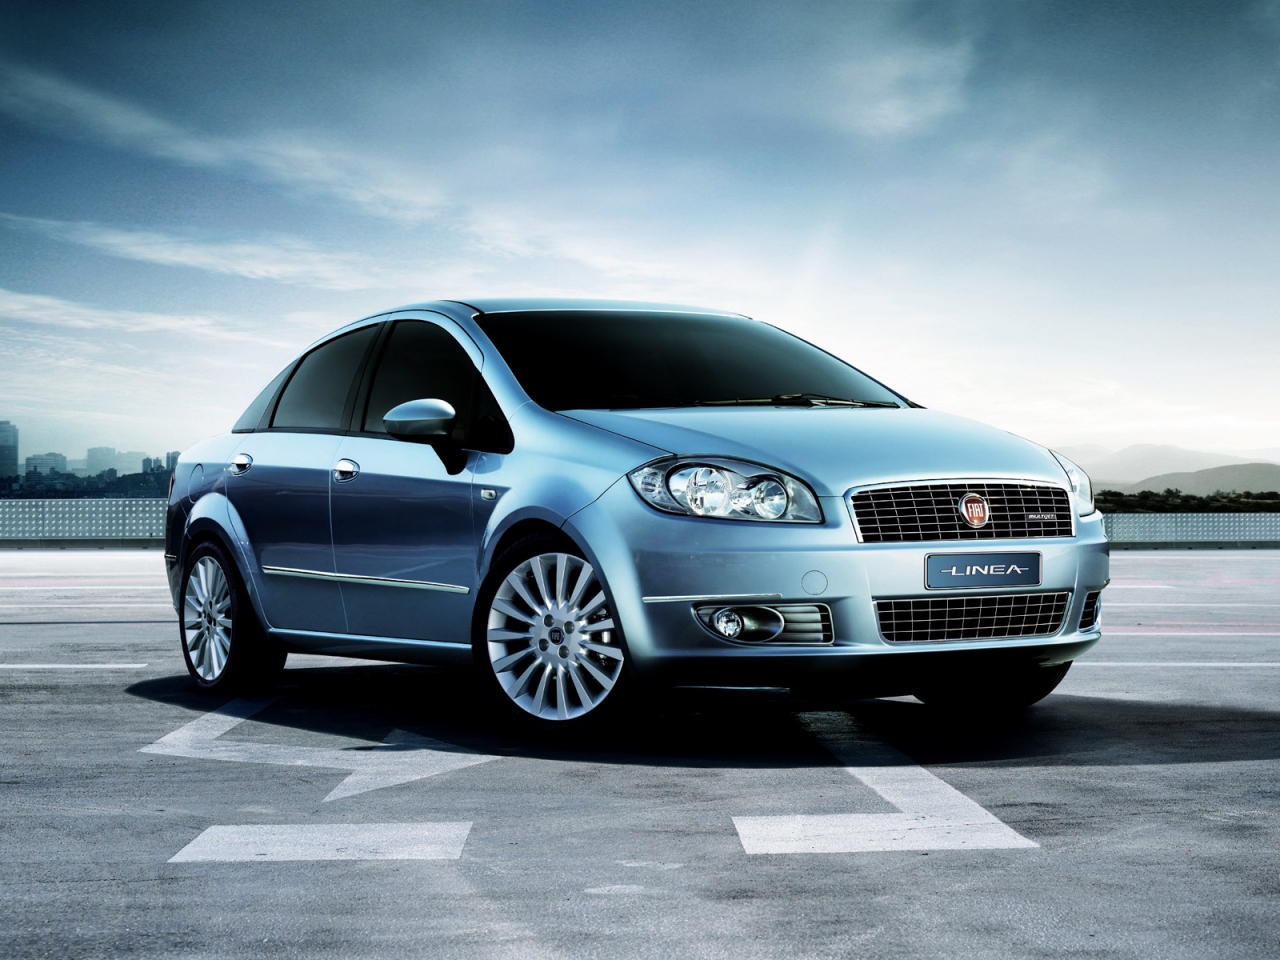 Fiat Linea 2009 for 1280 x 960 resolution